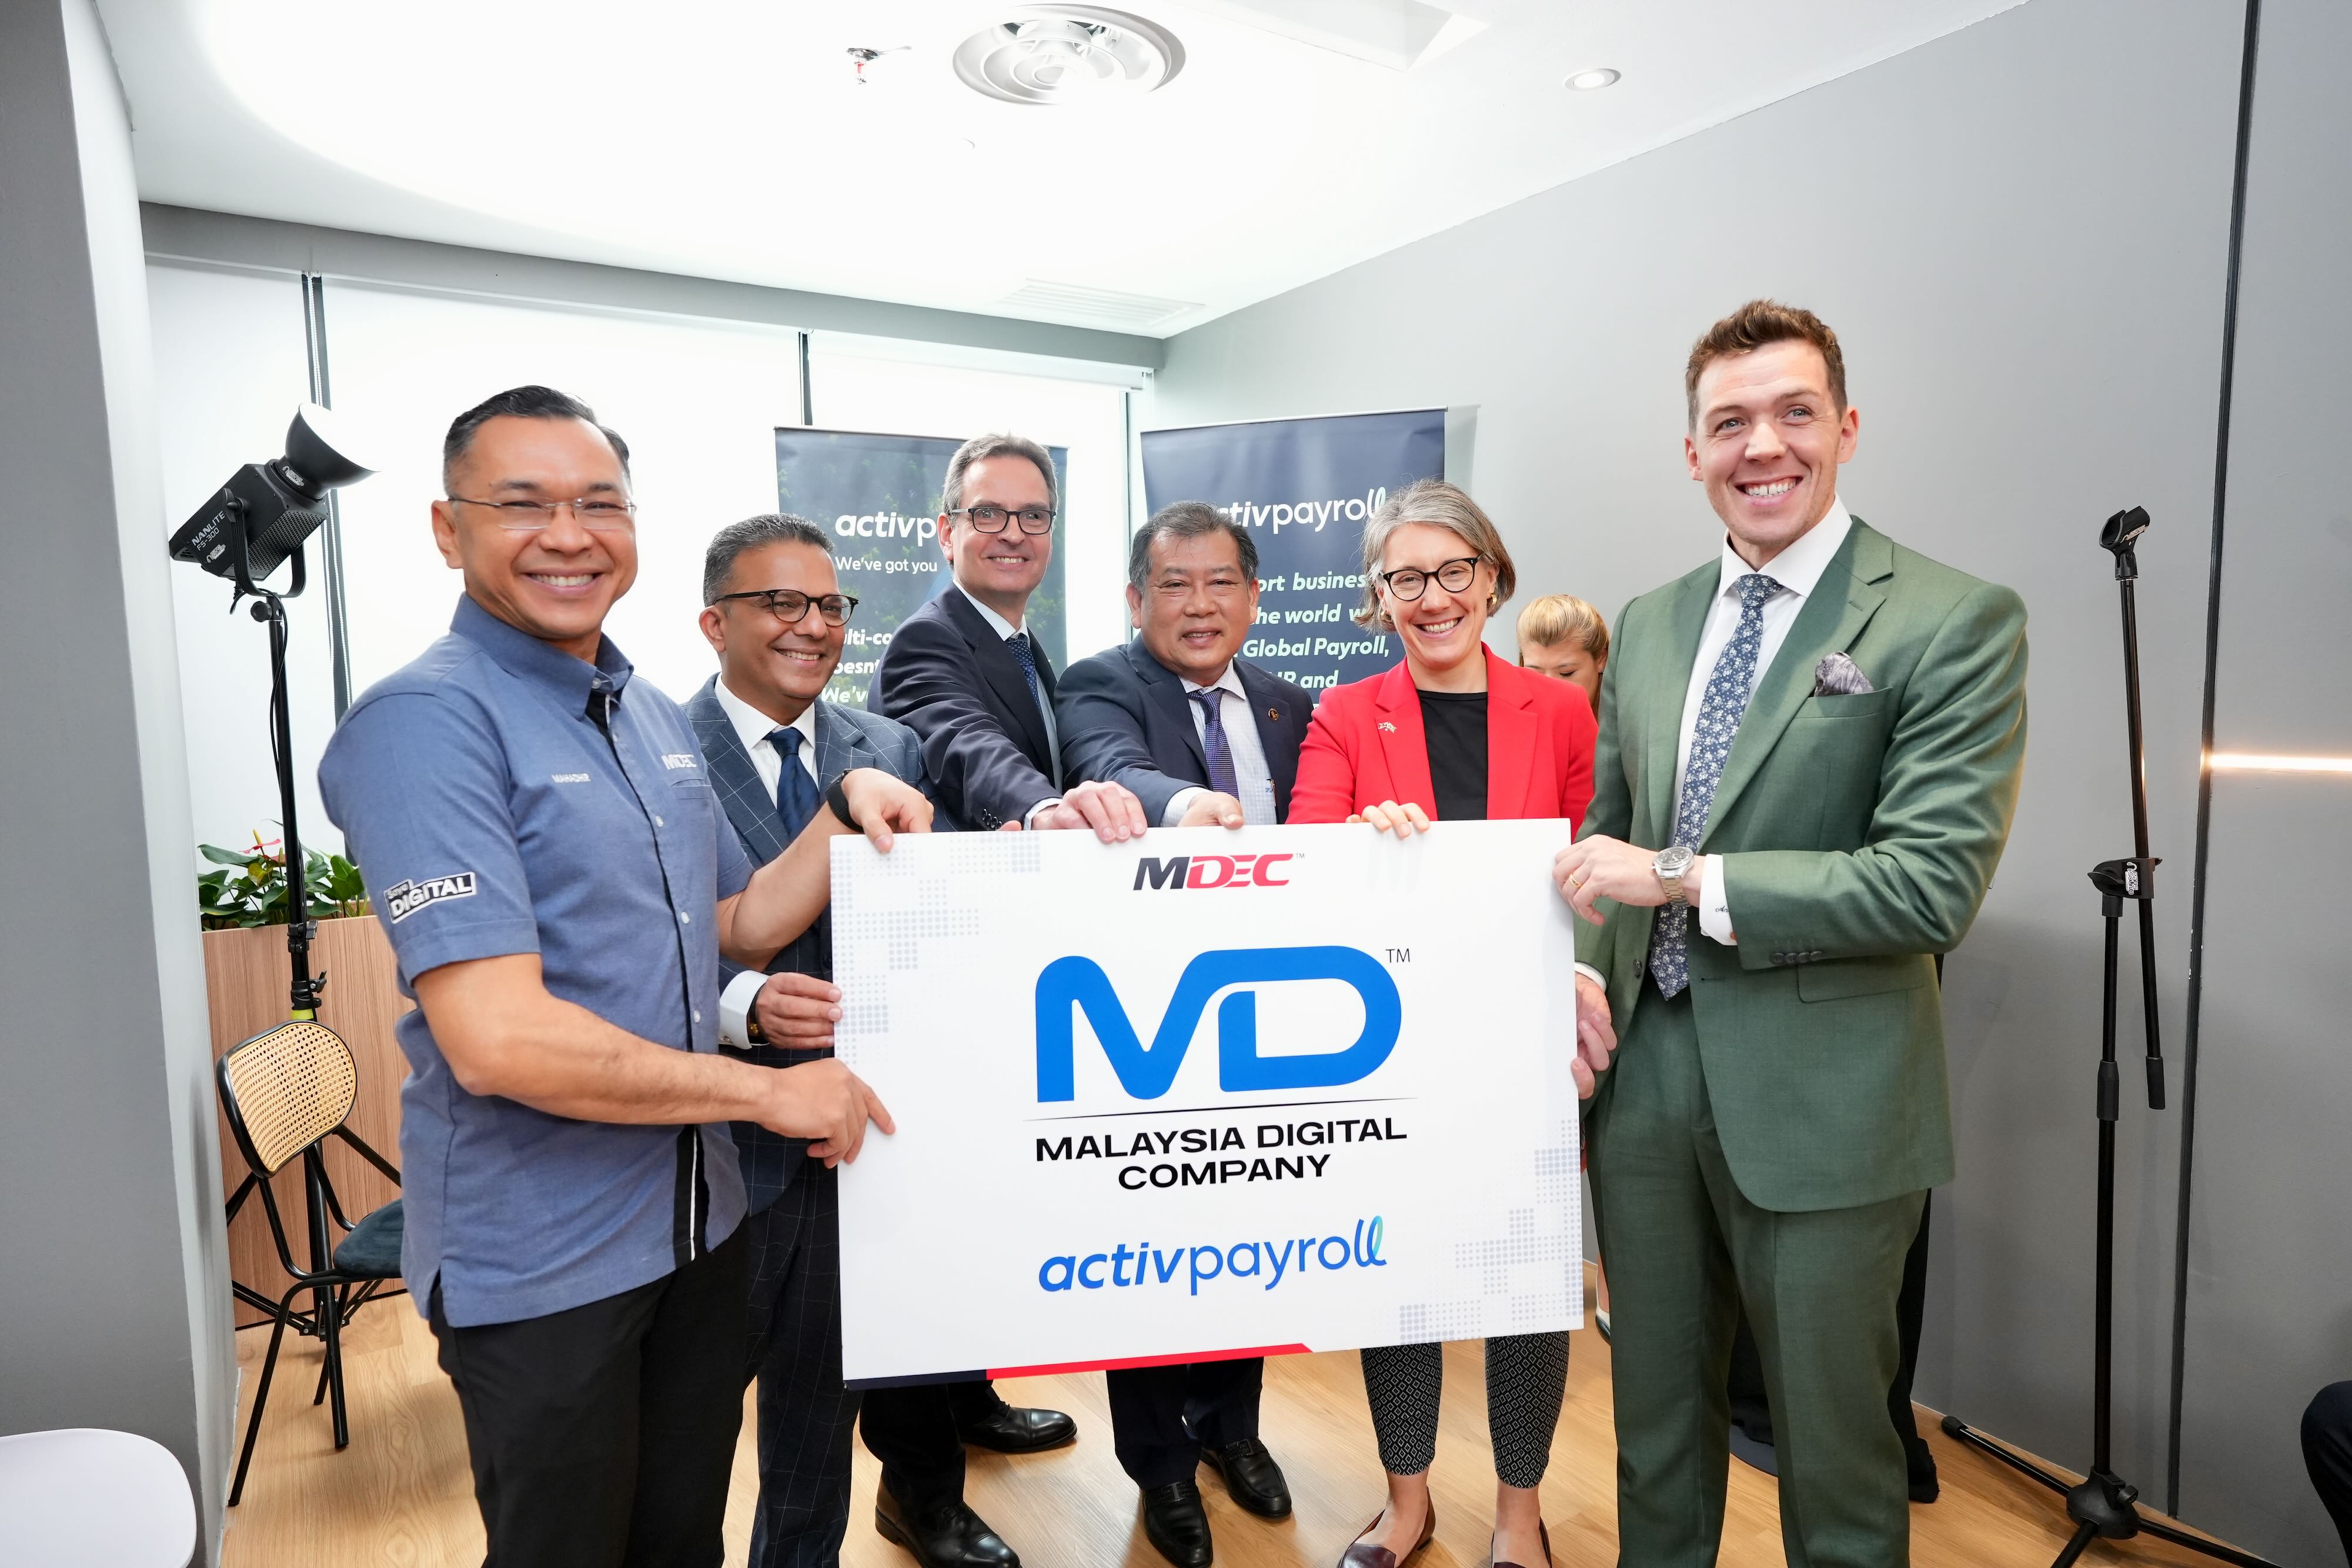 (L-R): Mahadhir Aziz, CEO of Malaysia Digital Economy Corporation (MDEC), Manish Mehta, regional director Activpayroll, David Deacon, chief people officer Activpayroll, Wilson Ugak Kumbong, deputy minister of Digital Malaysia, Ailsa Terry CMG, British high commissioner to Malaysia and Andrew Philp, executive director APAC Activpayroll during the Malaysia Digital Certificate Presentation